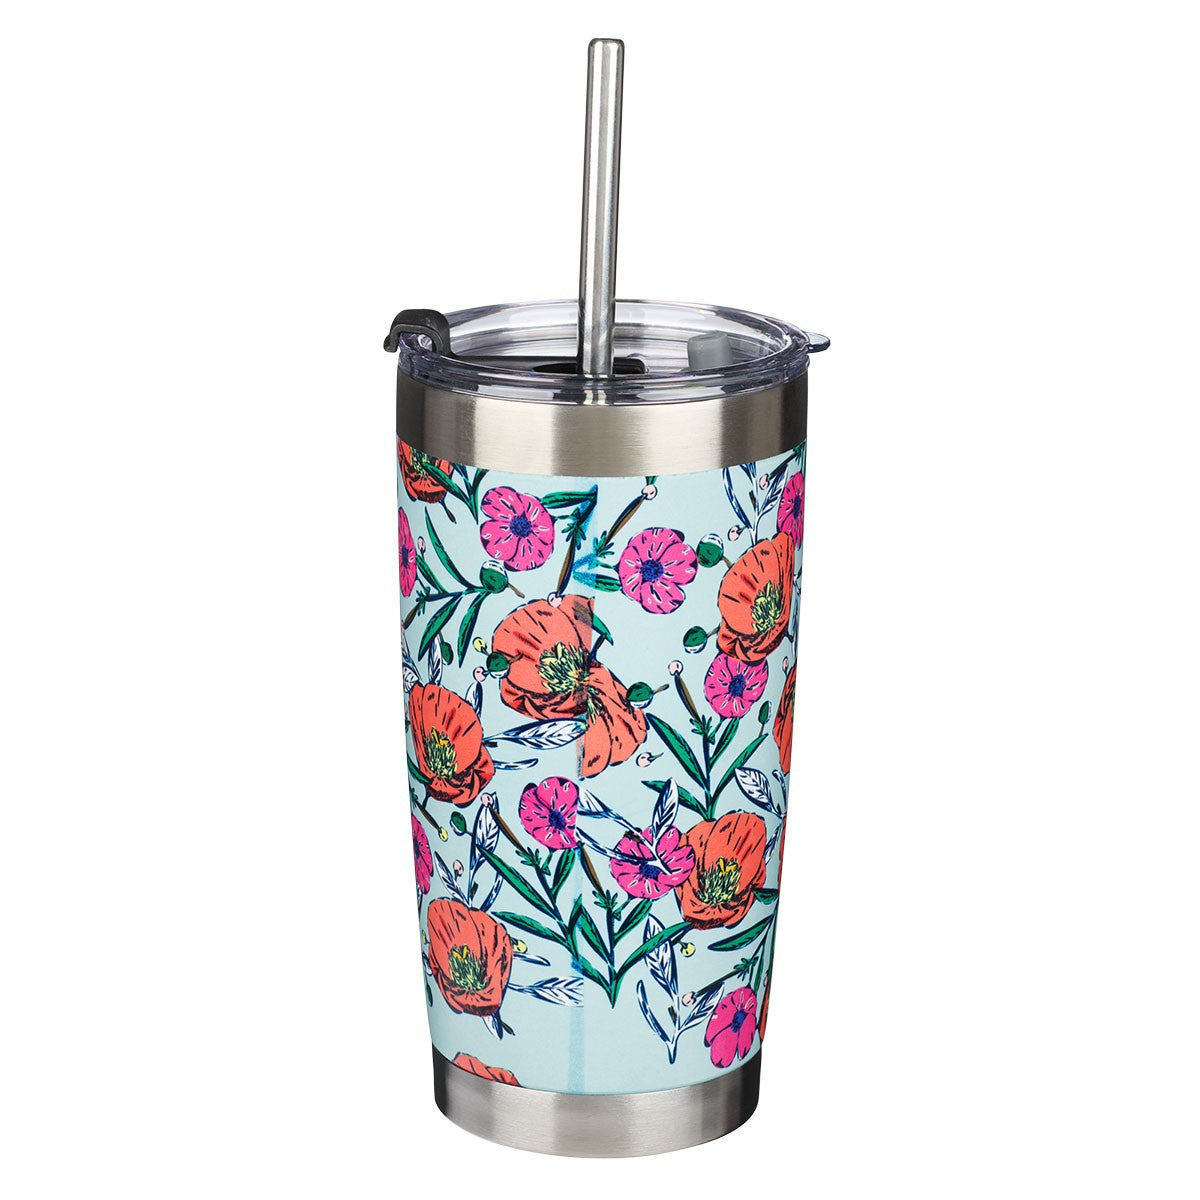 His Grace Stainless Steel Travel Mug With Reusable Stainless Steel Straw - The Christian Gift Company